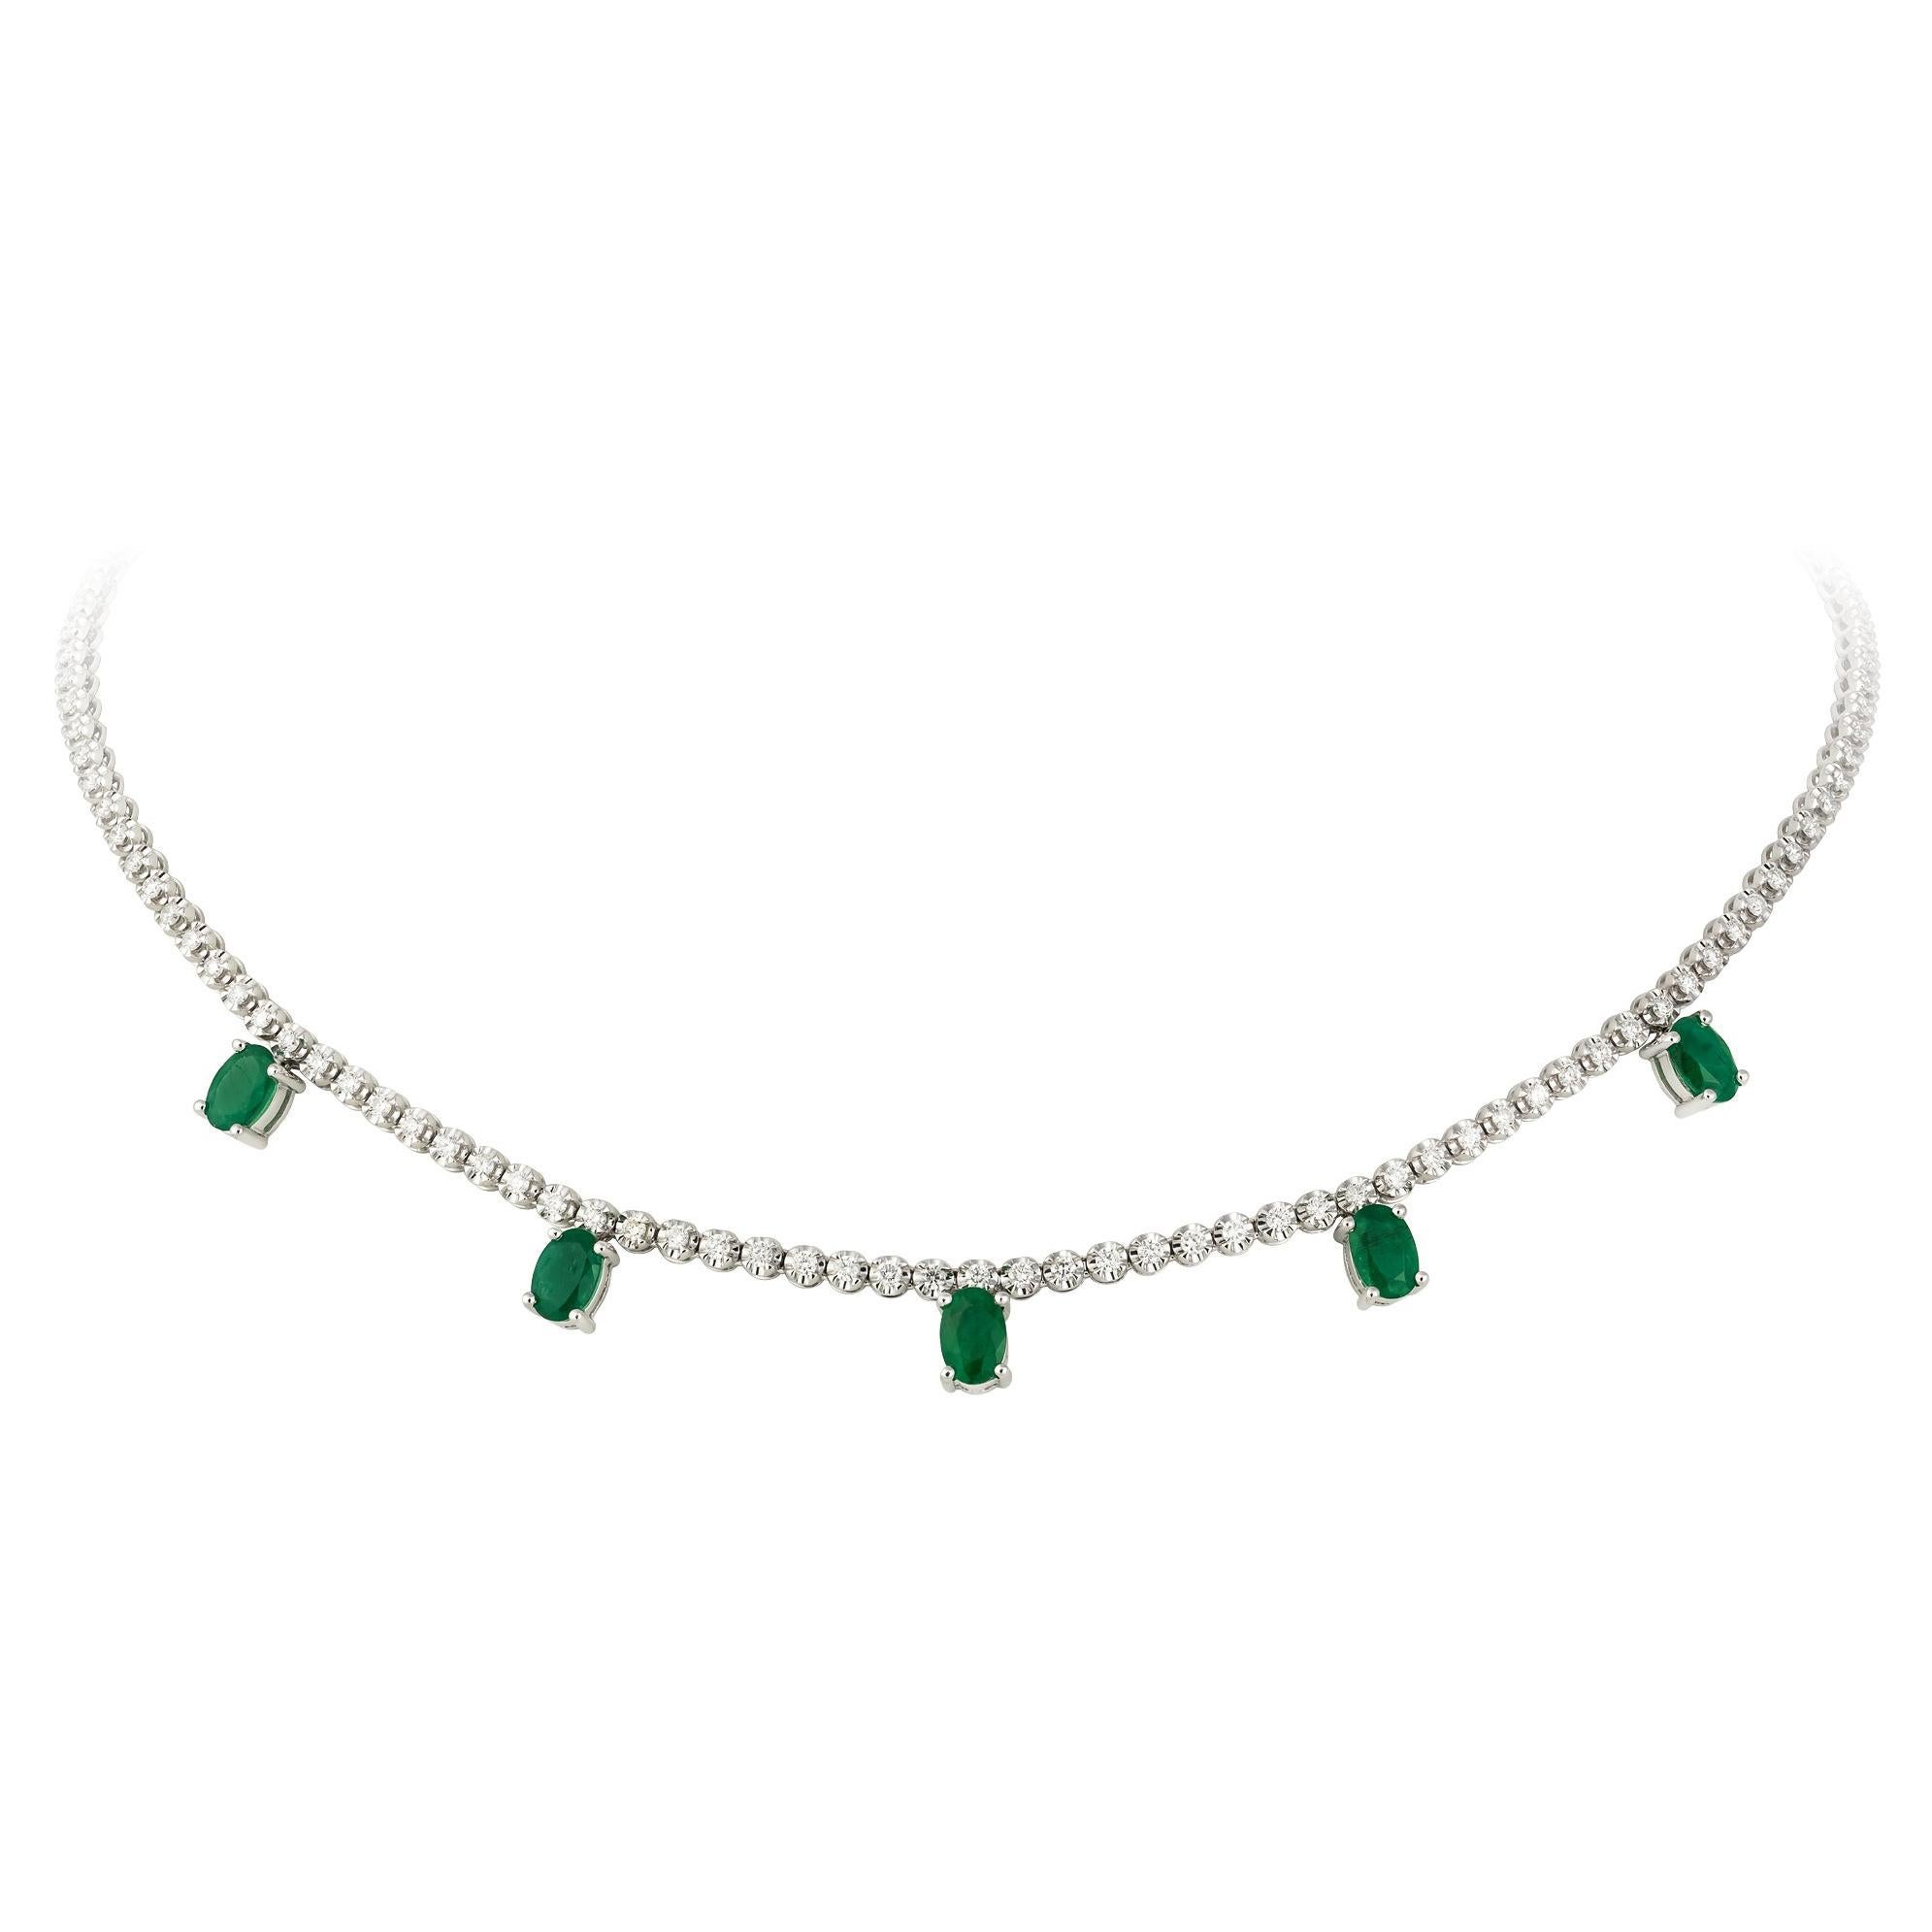 Fashionable Circle Emerald Diamond 18k White Gold Necklace Choker for Her For Sale